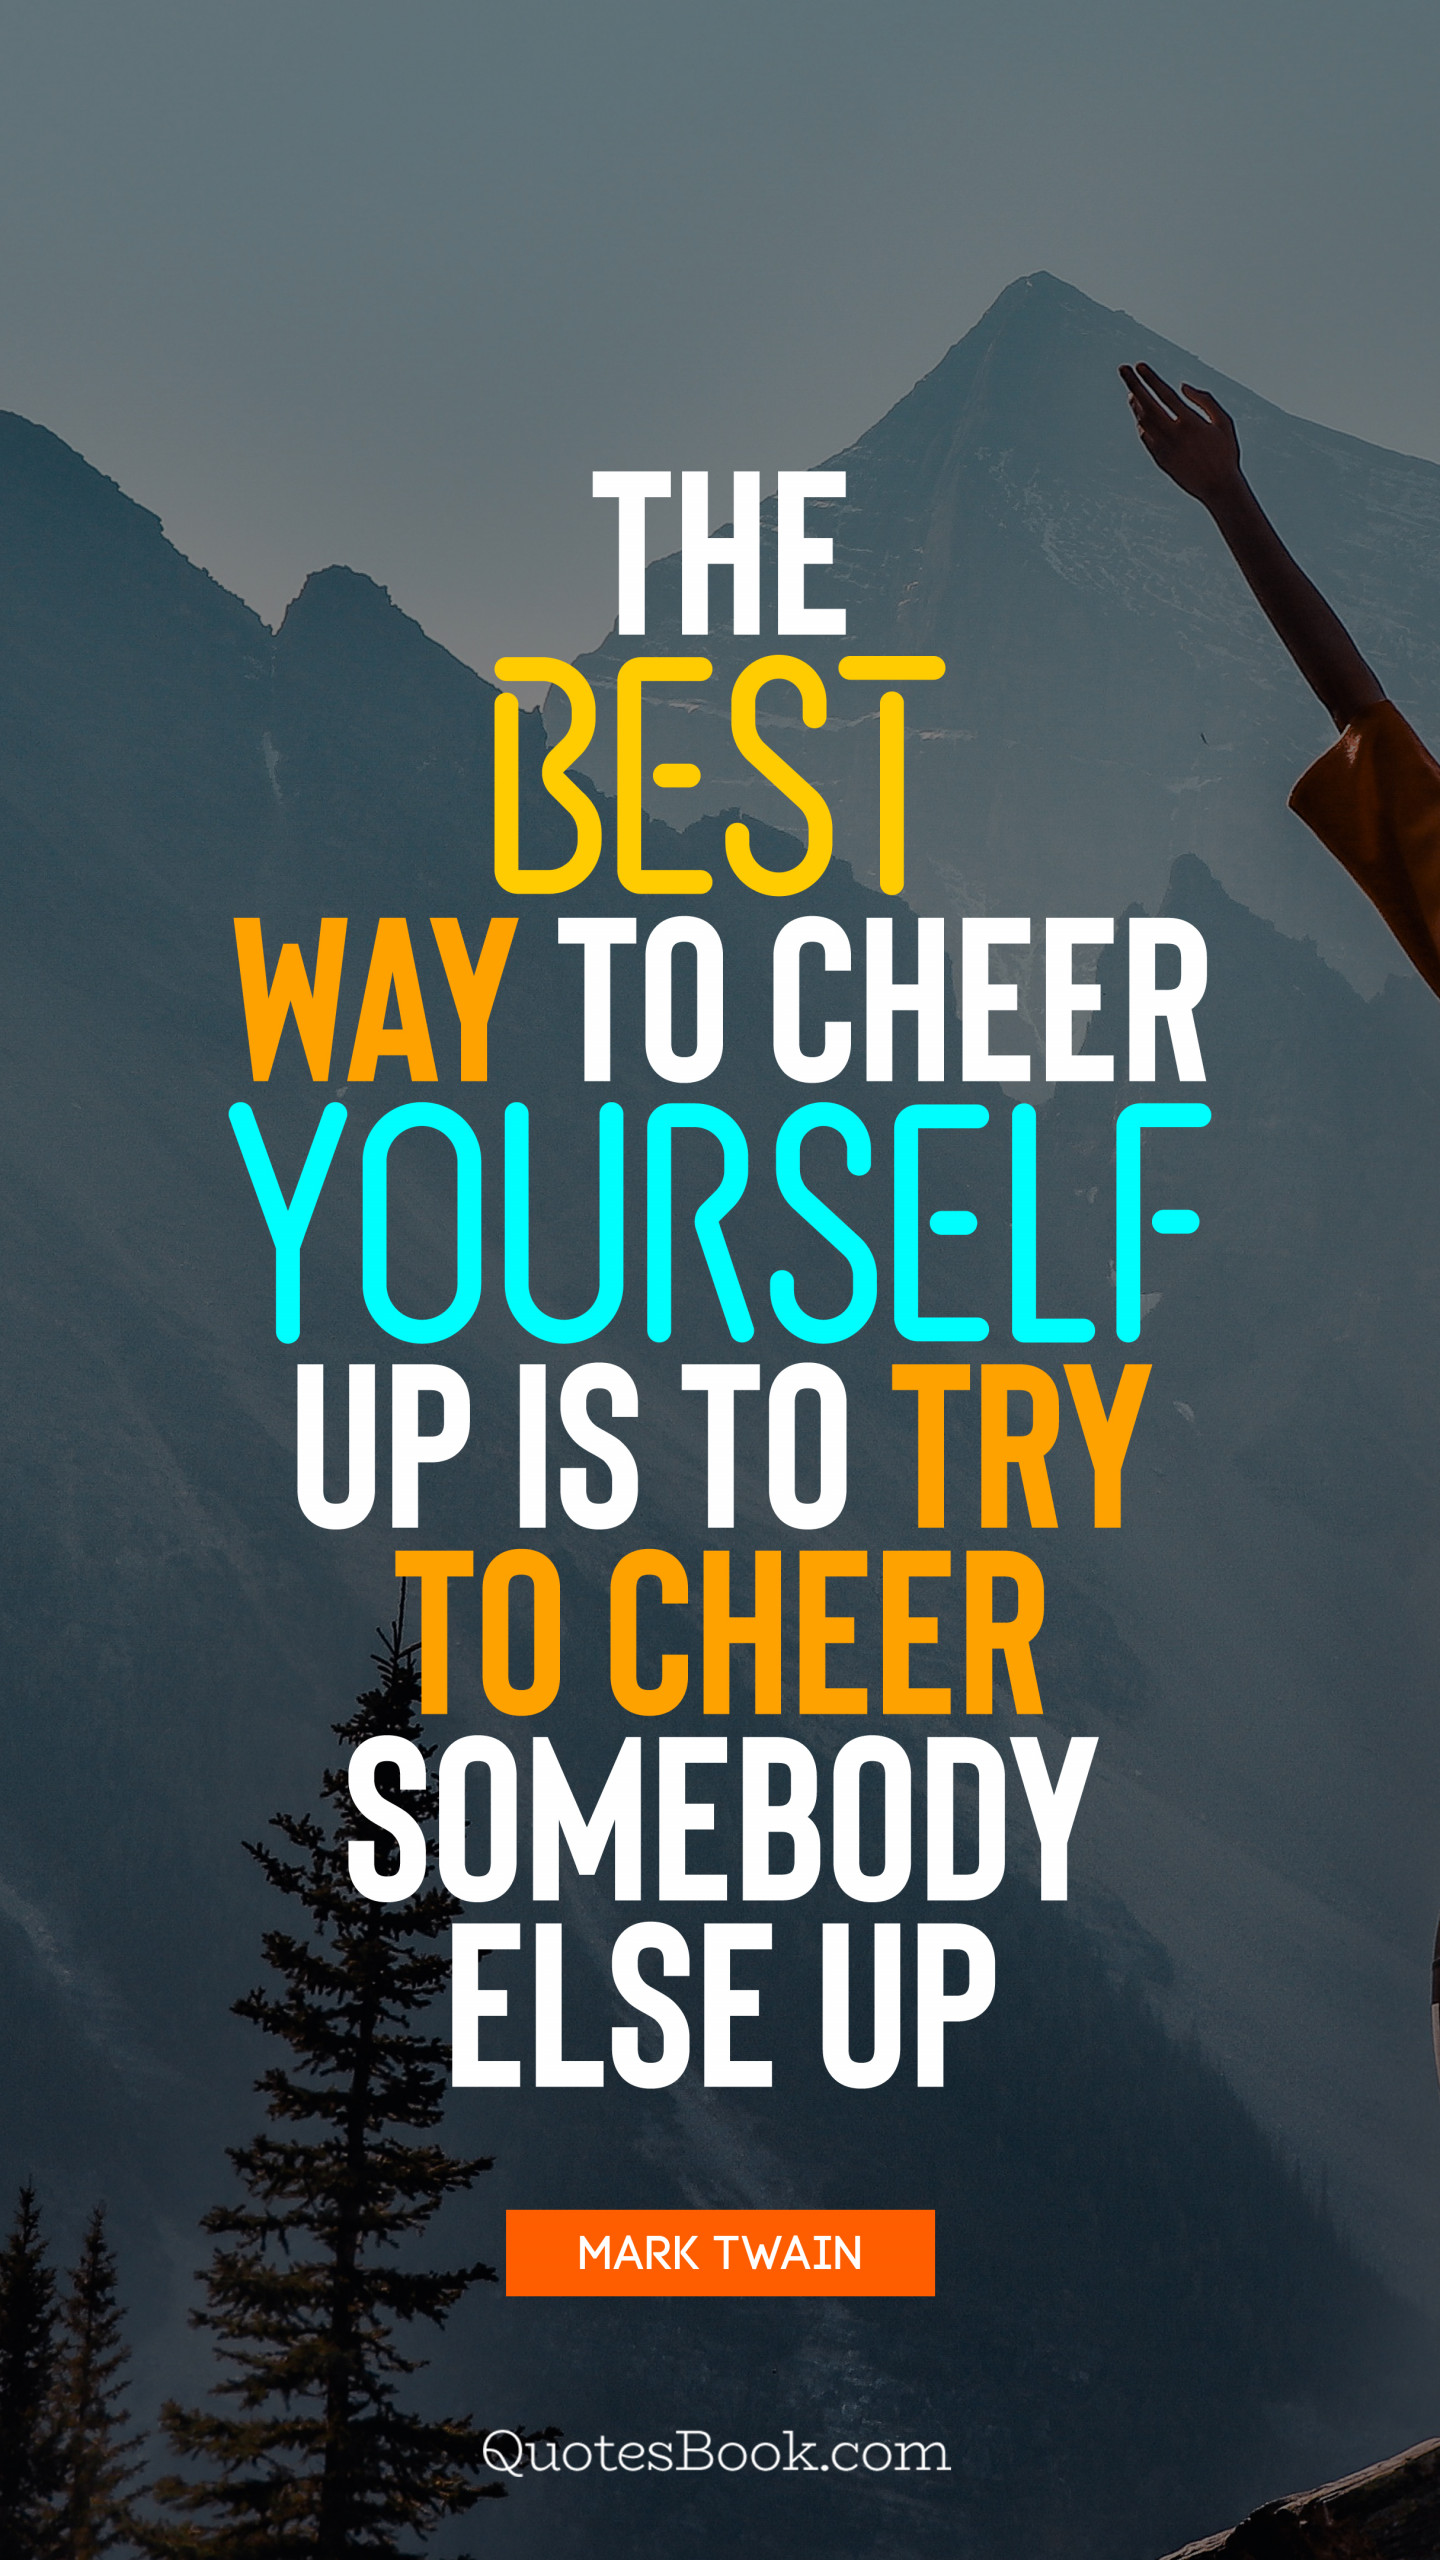 The best way to cheer yourself up is to try to cheer